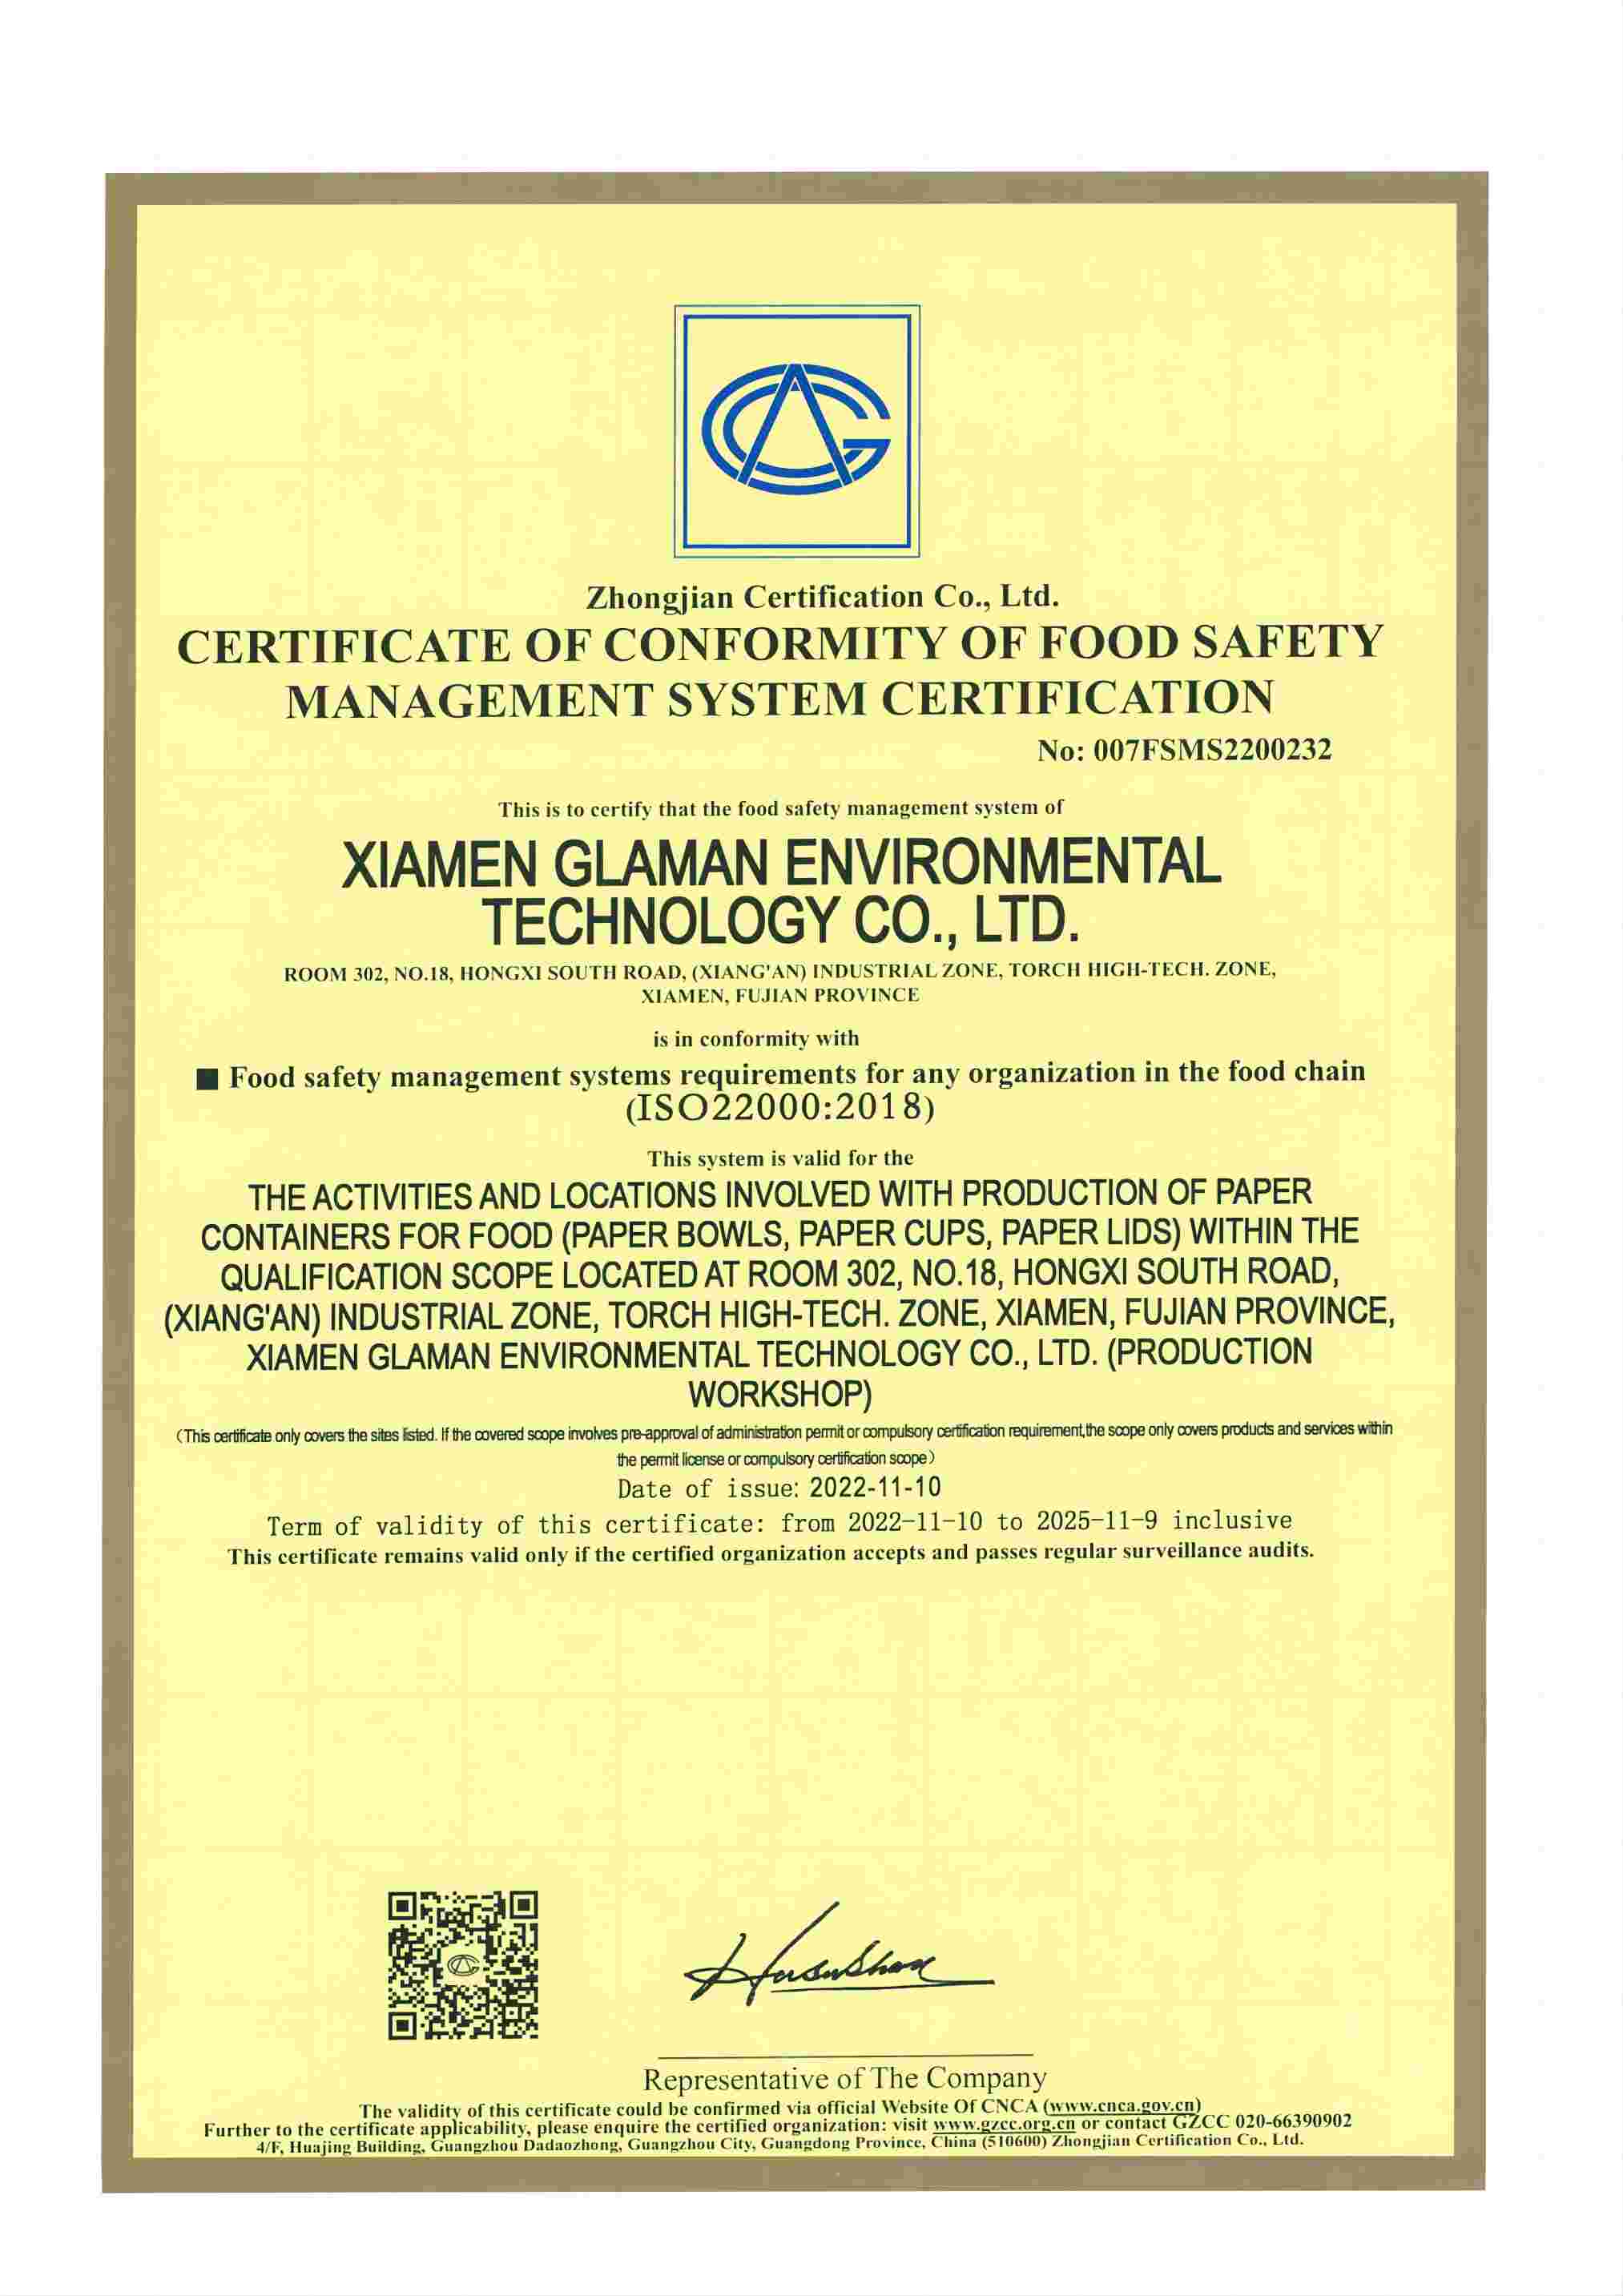 The certification of ISO22000